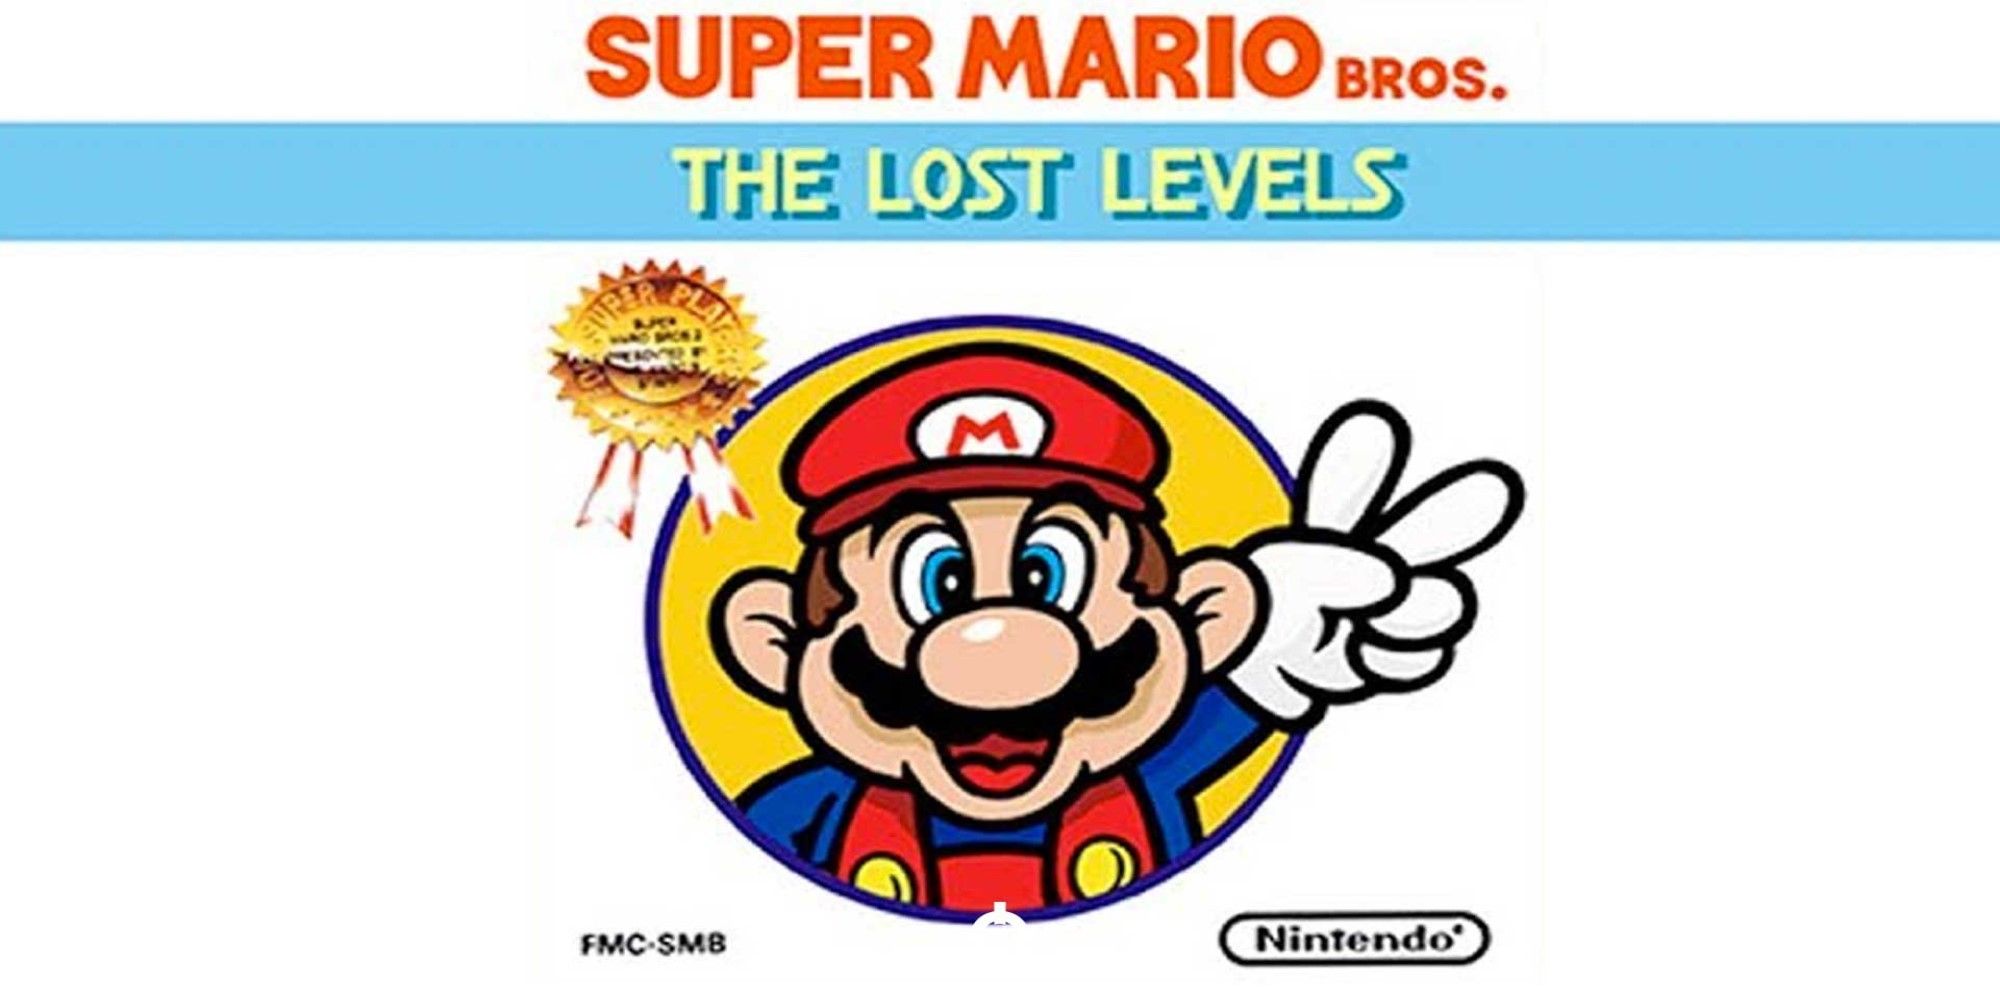 Cover illustration of Super Mario Bros.: The Lost Levels